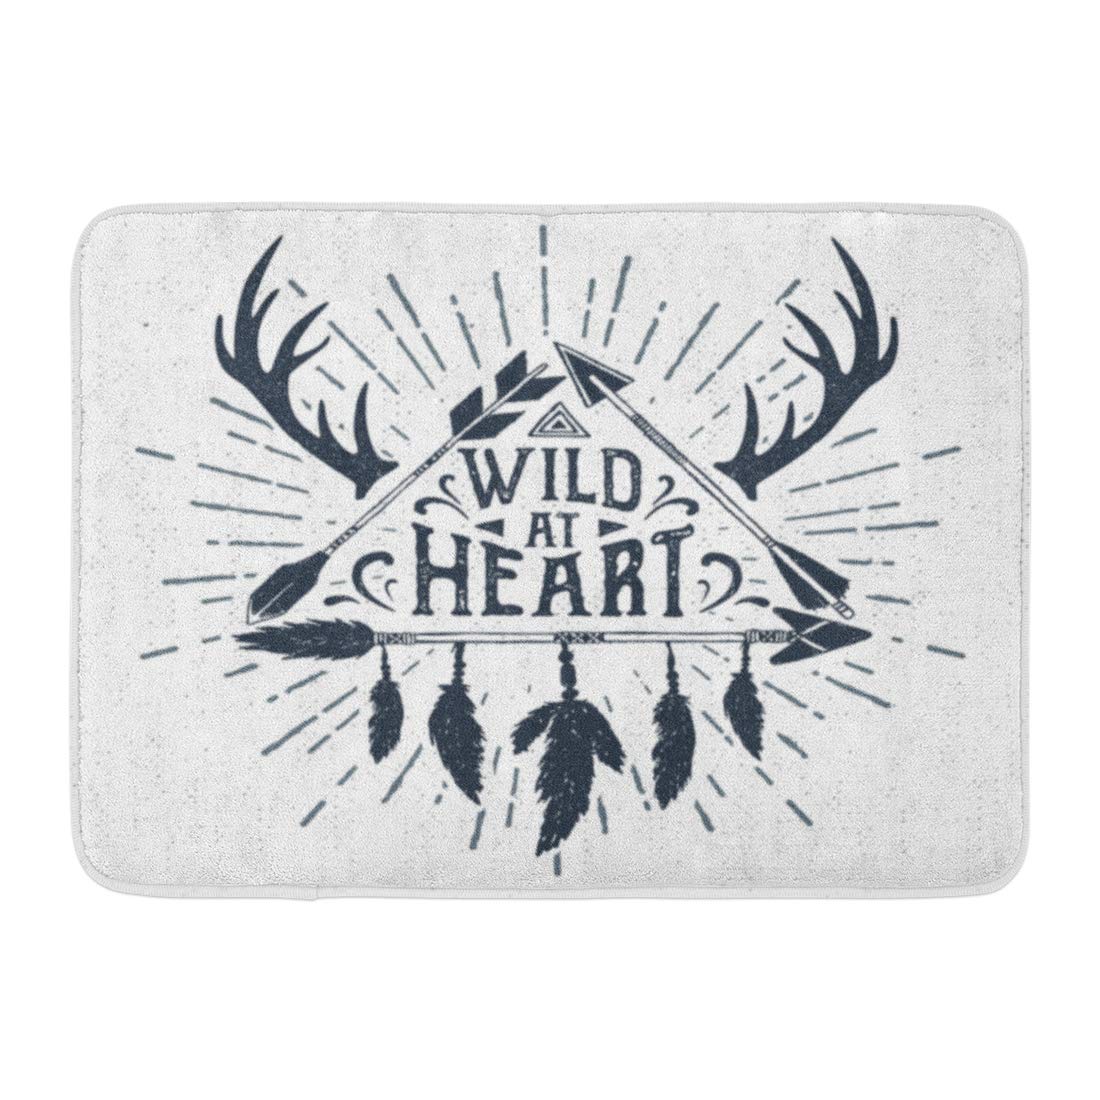 GODPOK Hand Black Vintage Tribal Badge with Arrows Triangle and Wild at Heart Lettering White Drawn American Rug Doormat Bath Mat 23.6x15.7 inch - image 1 of 1